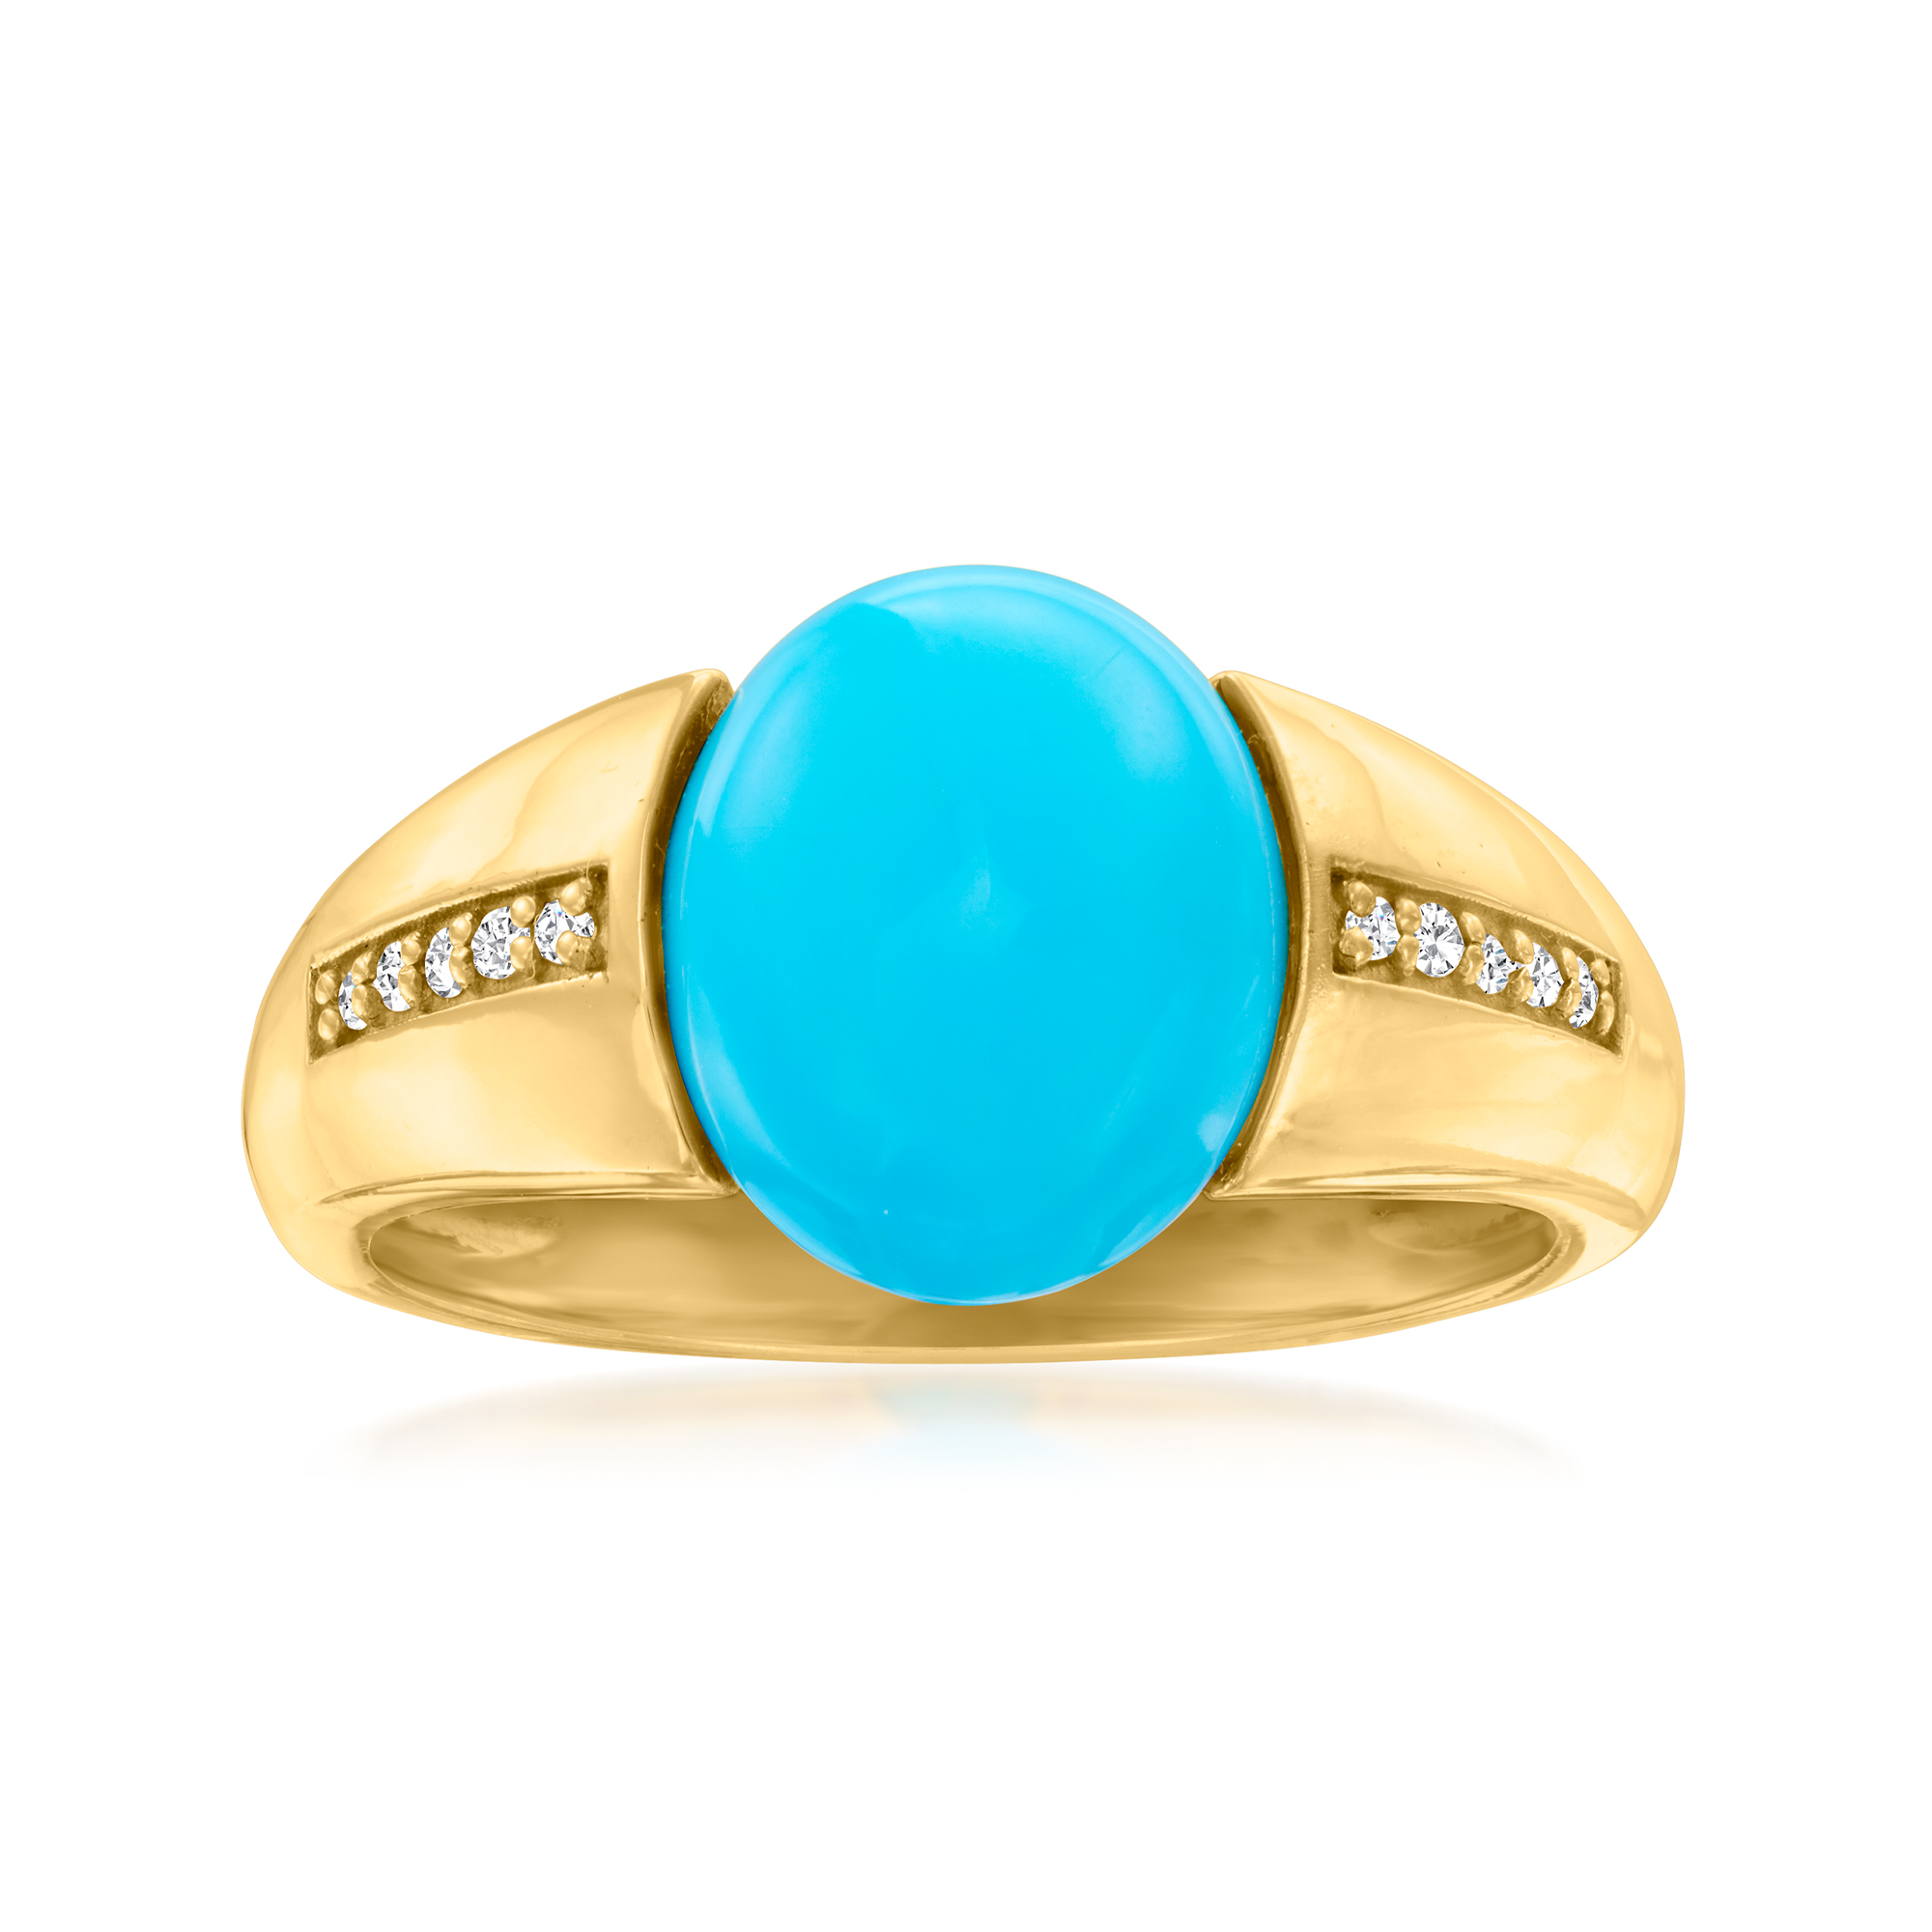 CEYLONMINE Ceylonmine Golden Firoza Stone Ring for Women and Girls  (Adjustable) Copper Turquoise Gold Plated Ring Price in India - Buy  CEYLONMINE Ceylonmine Golden Firoza Stone Ring for Women and Girls  (Adjustable)